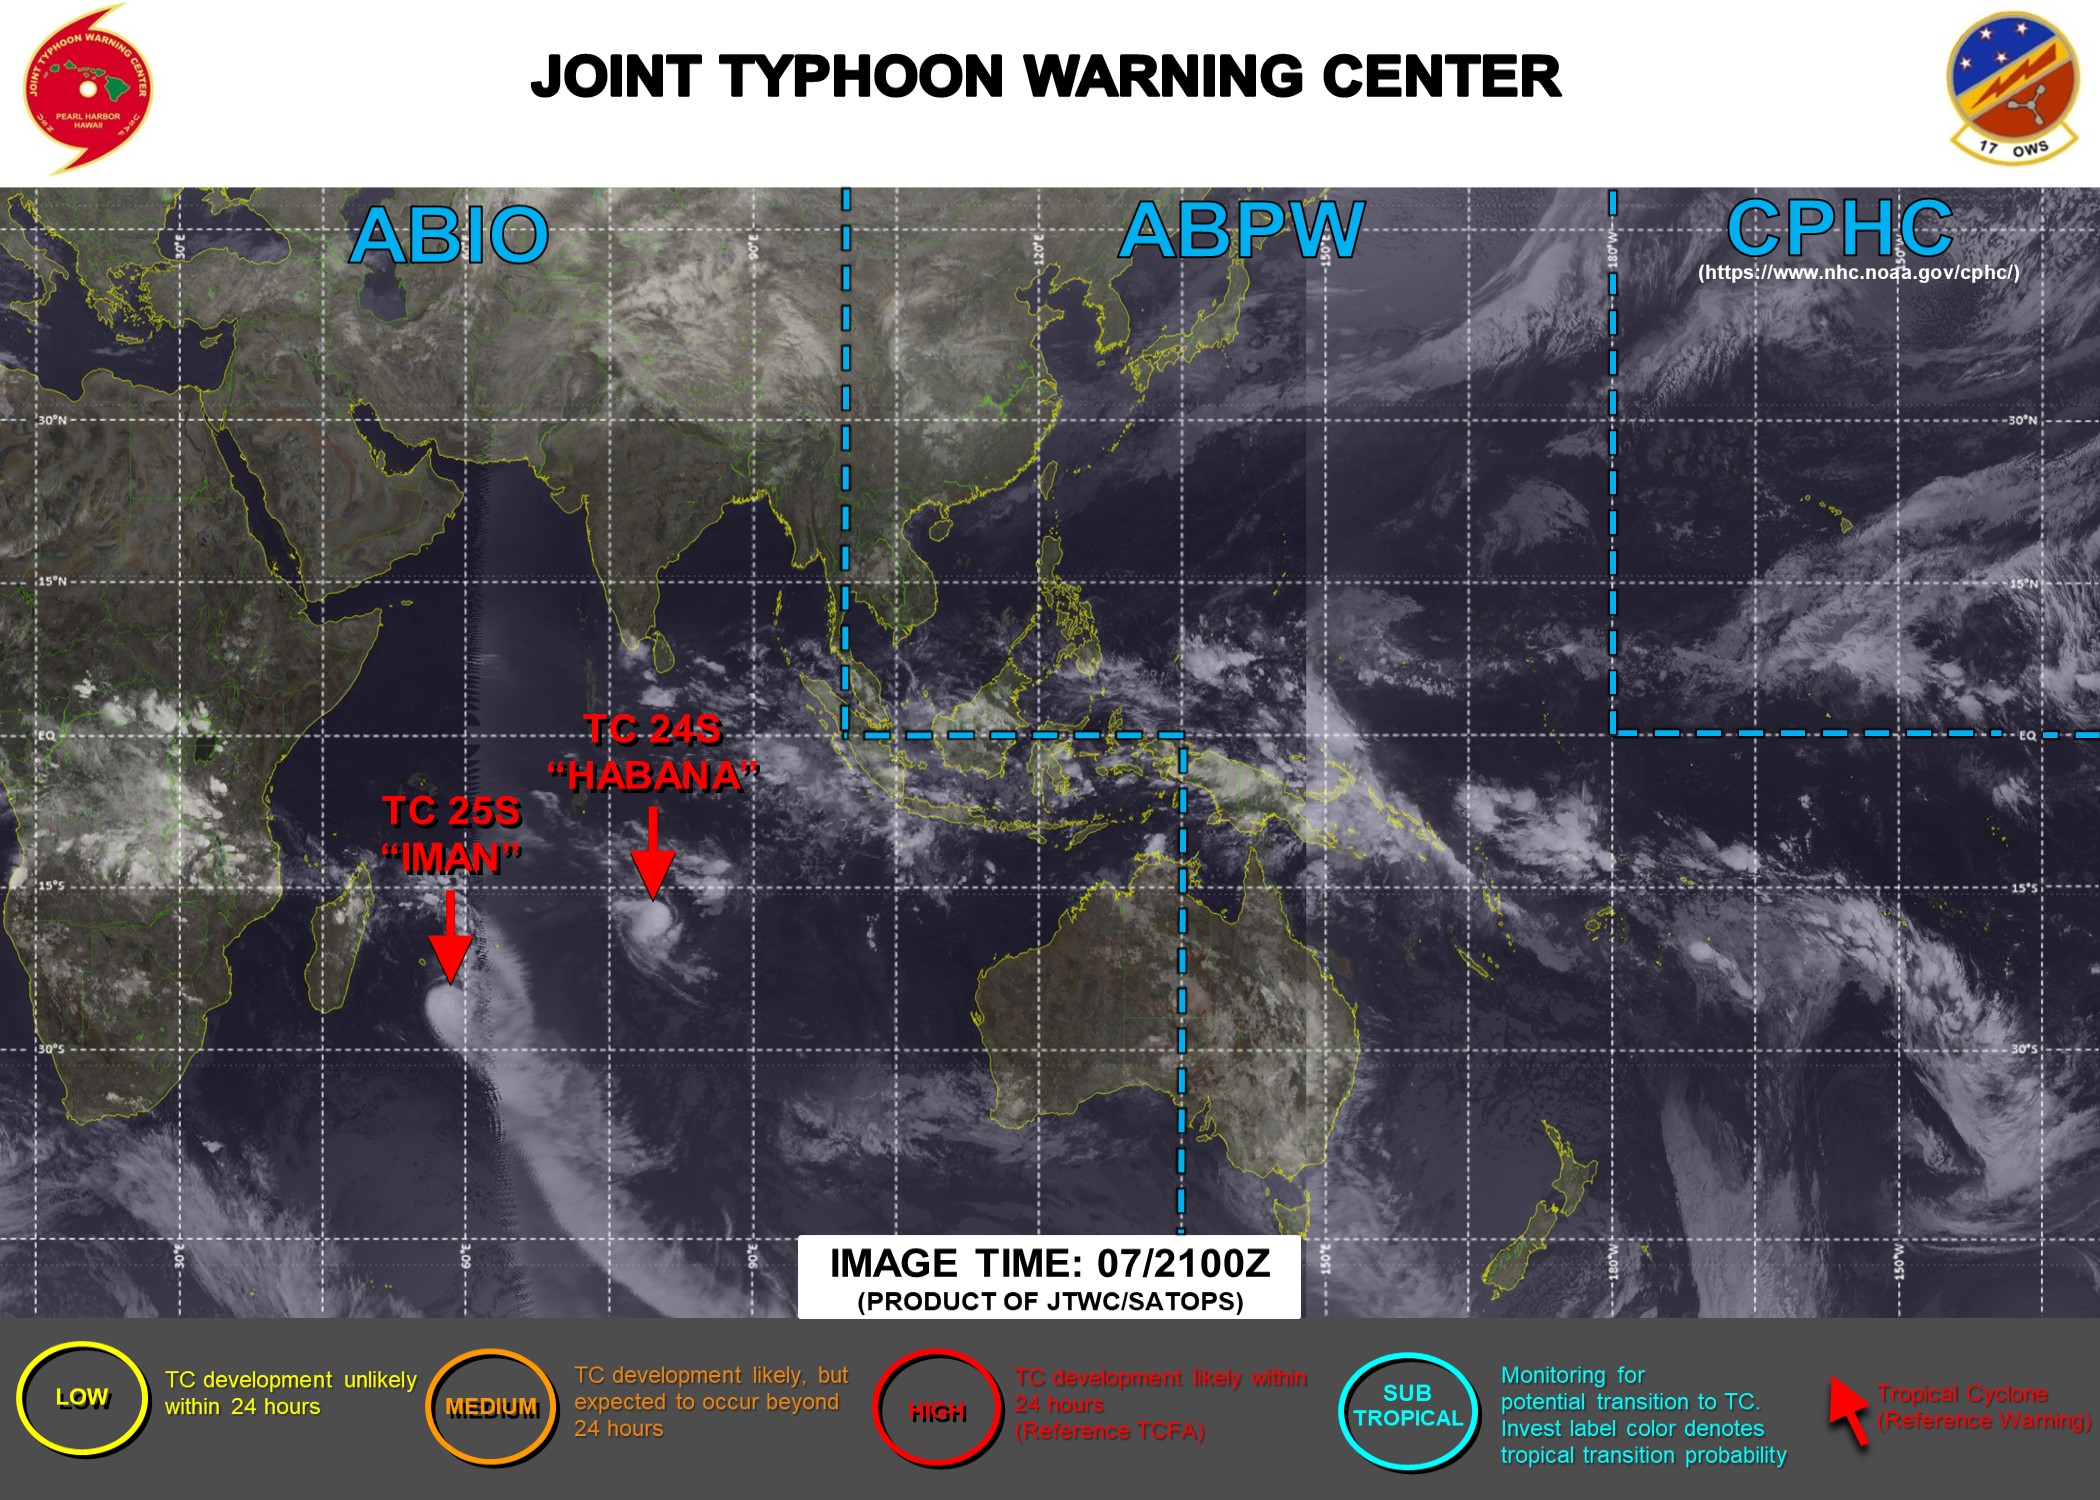 07/21UTC. JTWC IS ISSUING 12HOURLY WARNINGS ON 24S(HABANA) AND 25S(IMAN). 3HOURLY SATELLITE BULLETINS ARE ISSUED FOR BOTH SYSTEMS. THEY WERE DISCONTINUED FOR 23P(NIRAN) AND 22S(MARIAN).